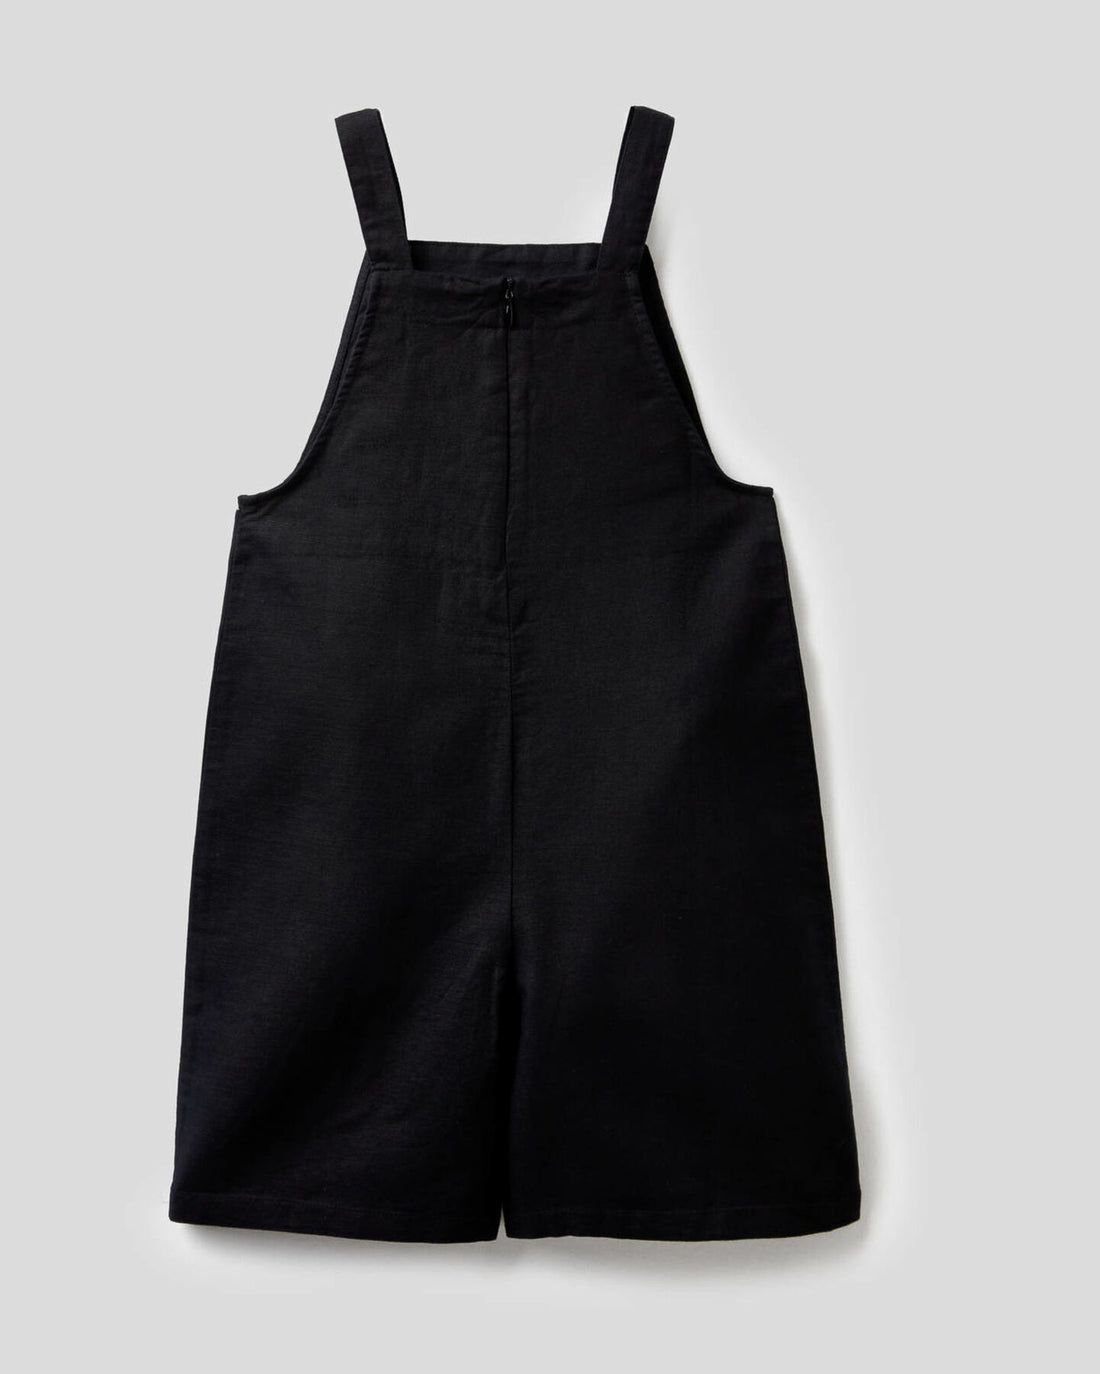 Black Overall